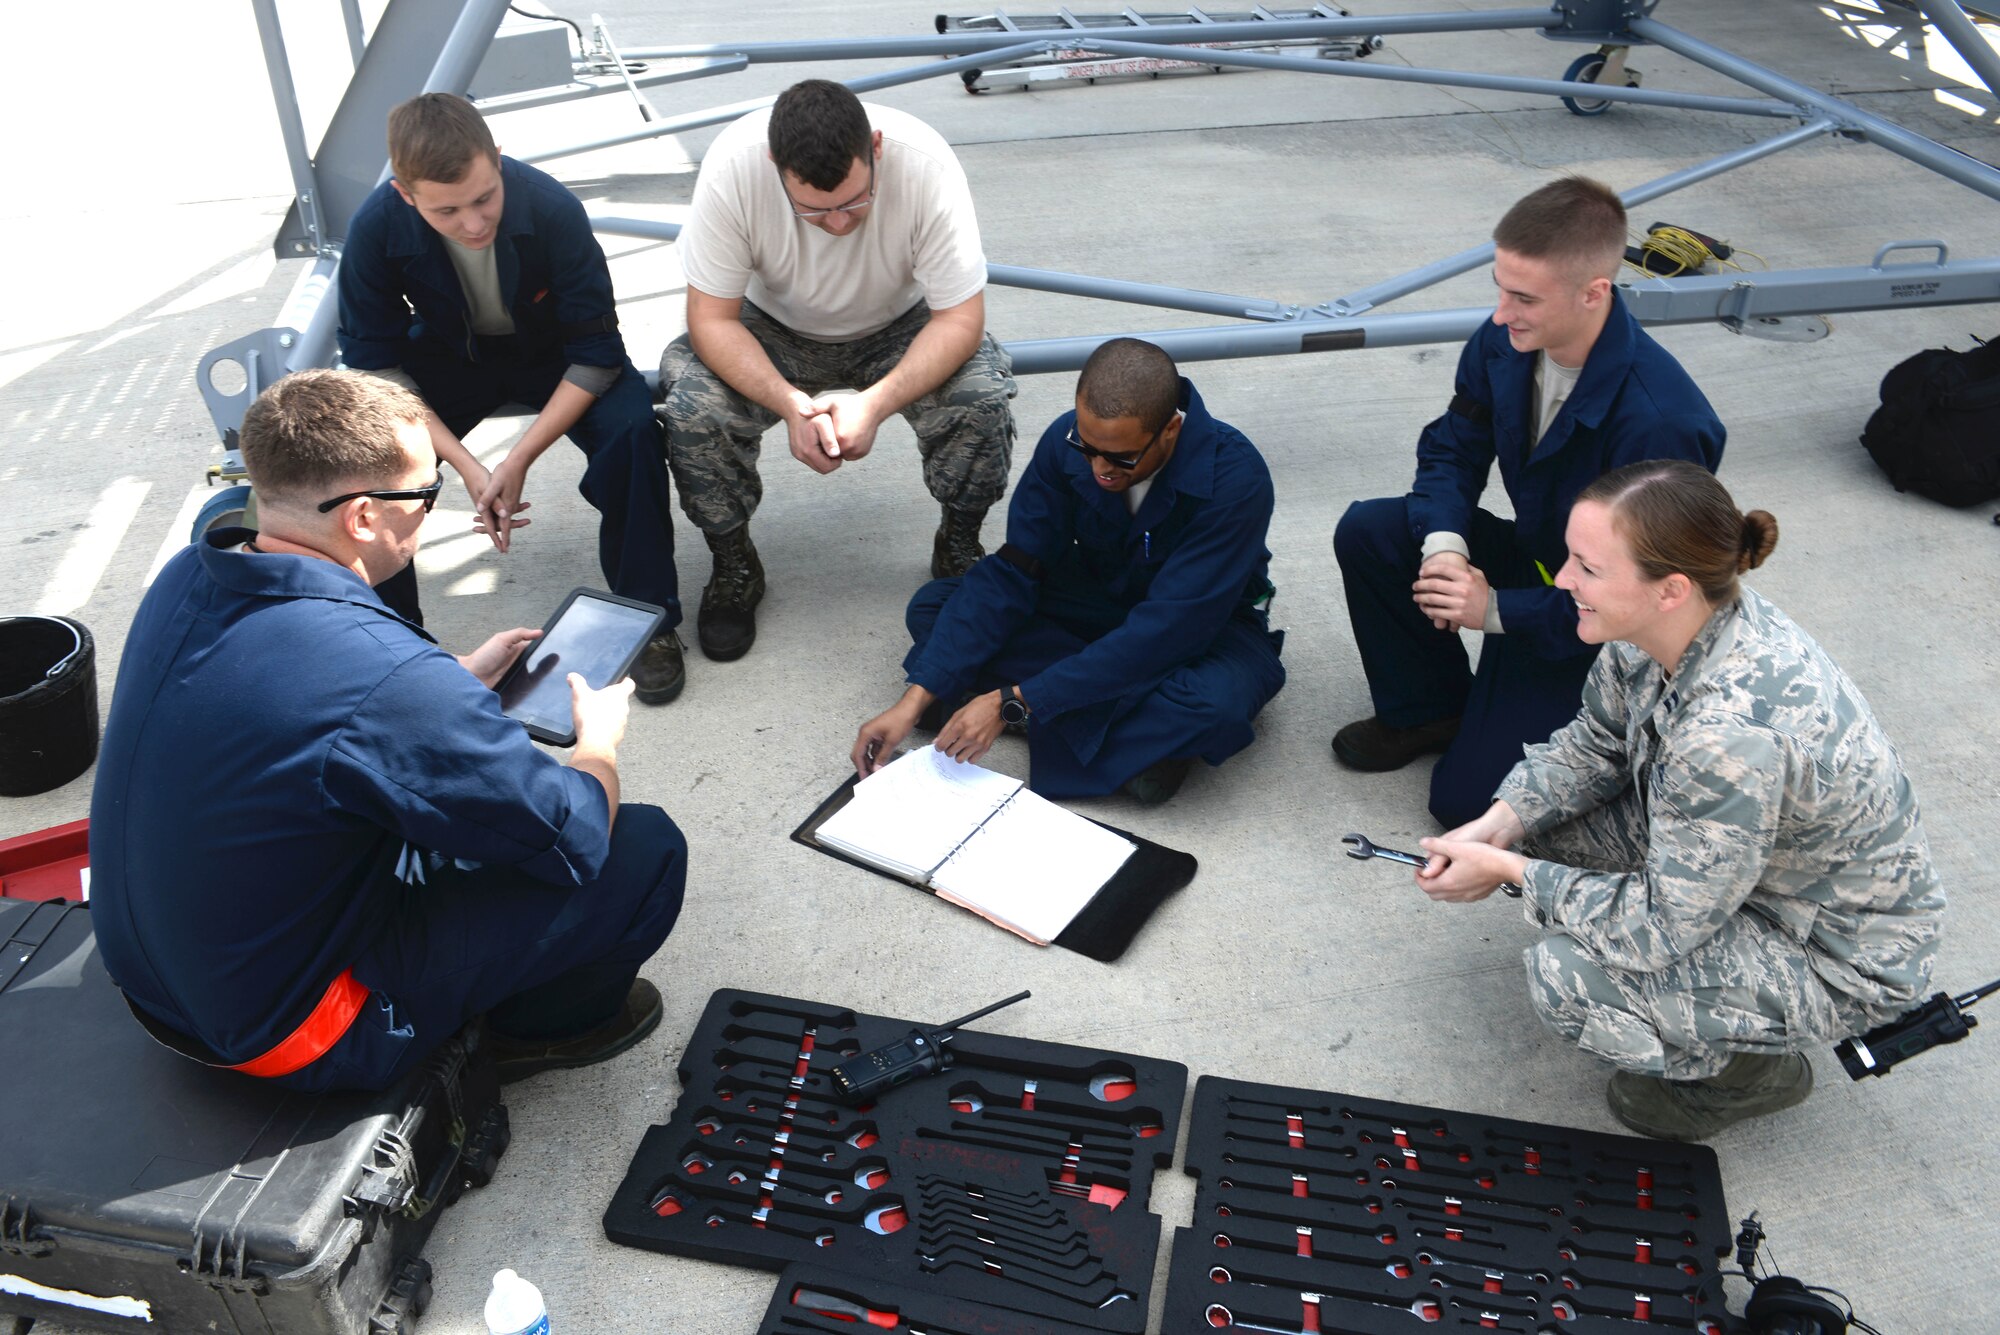 Capt. Lacey Koelling, officer in charge of the 34th Aircraft Maintenance Unit, visits Staff Sgt. Justin Green, electro environmental systems specialists assigned to the 28th Aircraft Maintenance Squadron, on Ellsworth Air Force Base, S.D., Sept. 26, 2017. Koelling likes to spend as much time as she can with Airmen on the flightline and encourage them throughout the day. (U.S. Air Force photo by Airman 1st Class Thomas Karol)